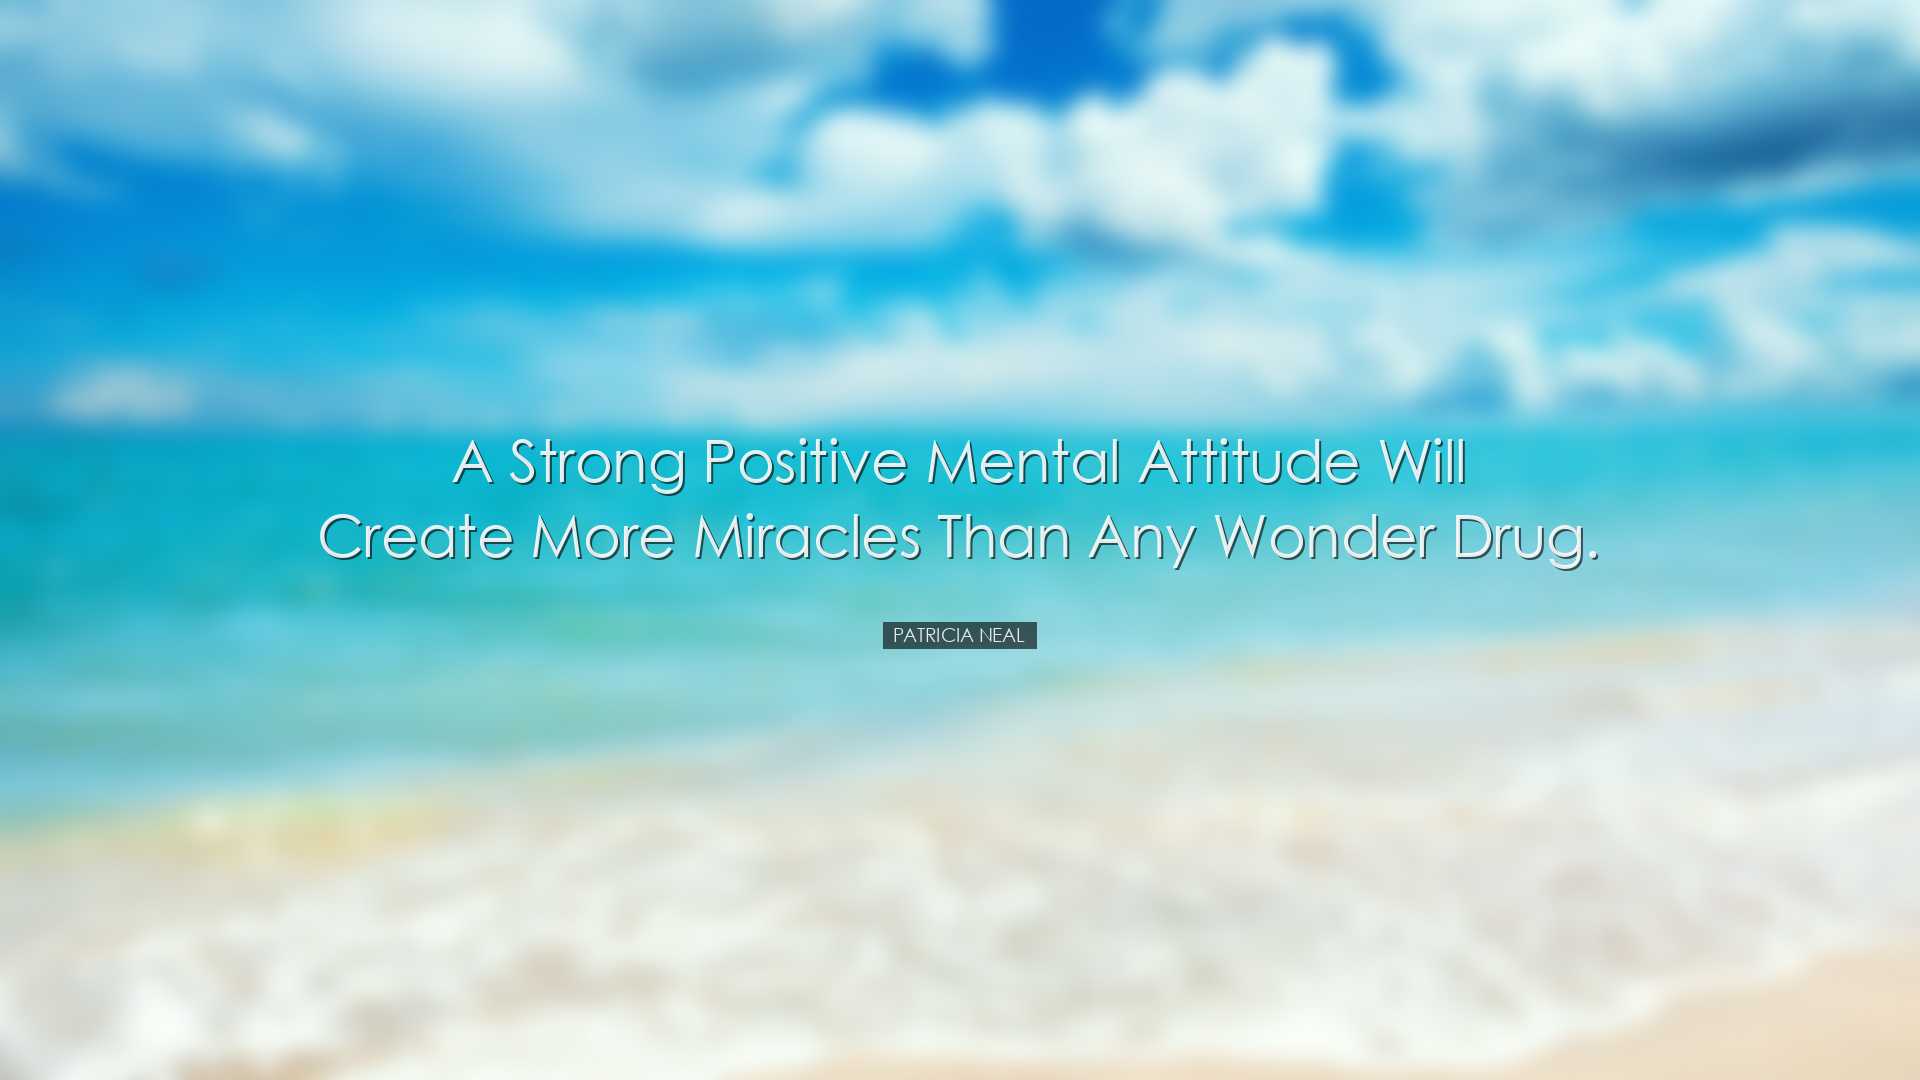 A strong positive mental attitude will create more miracles than a